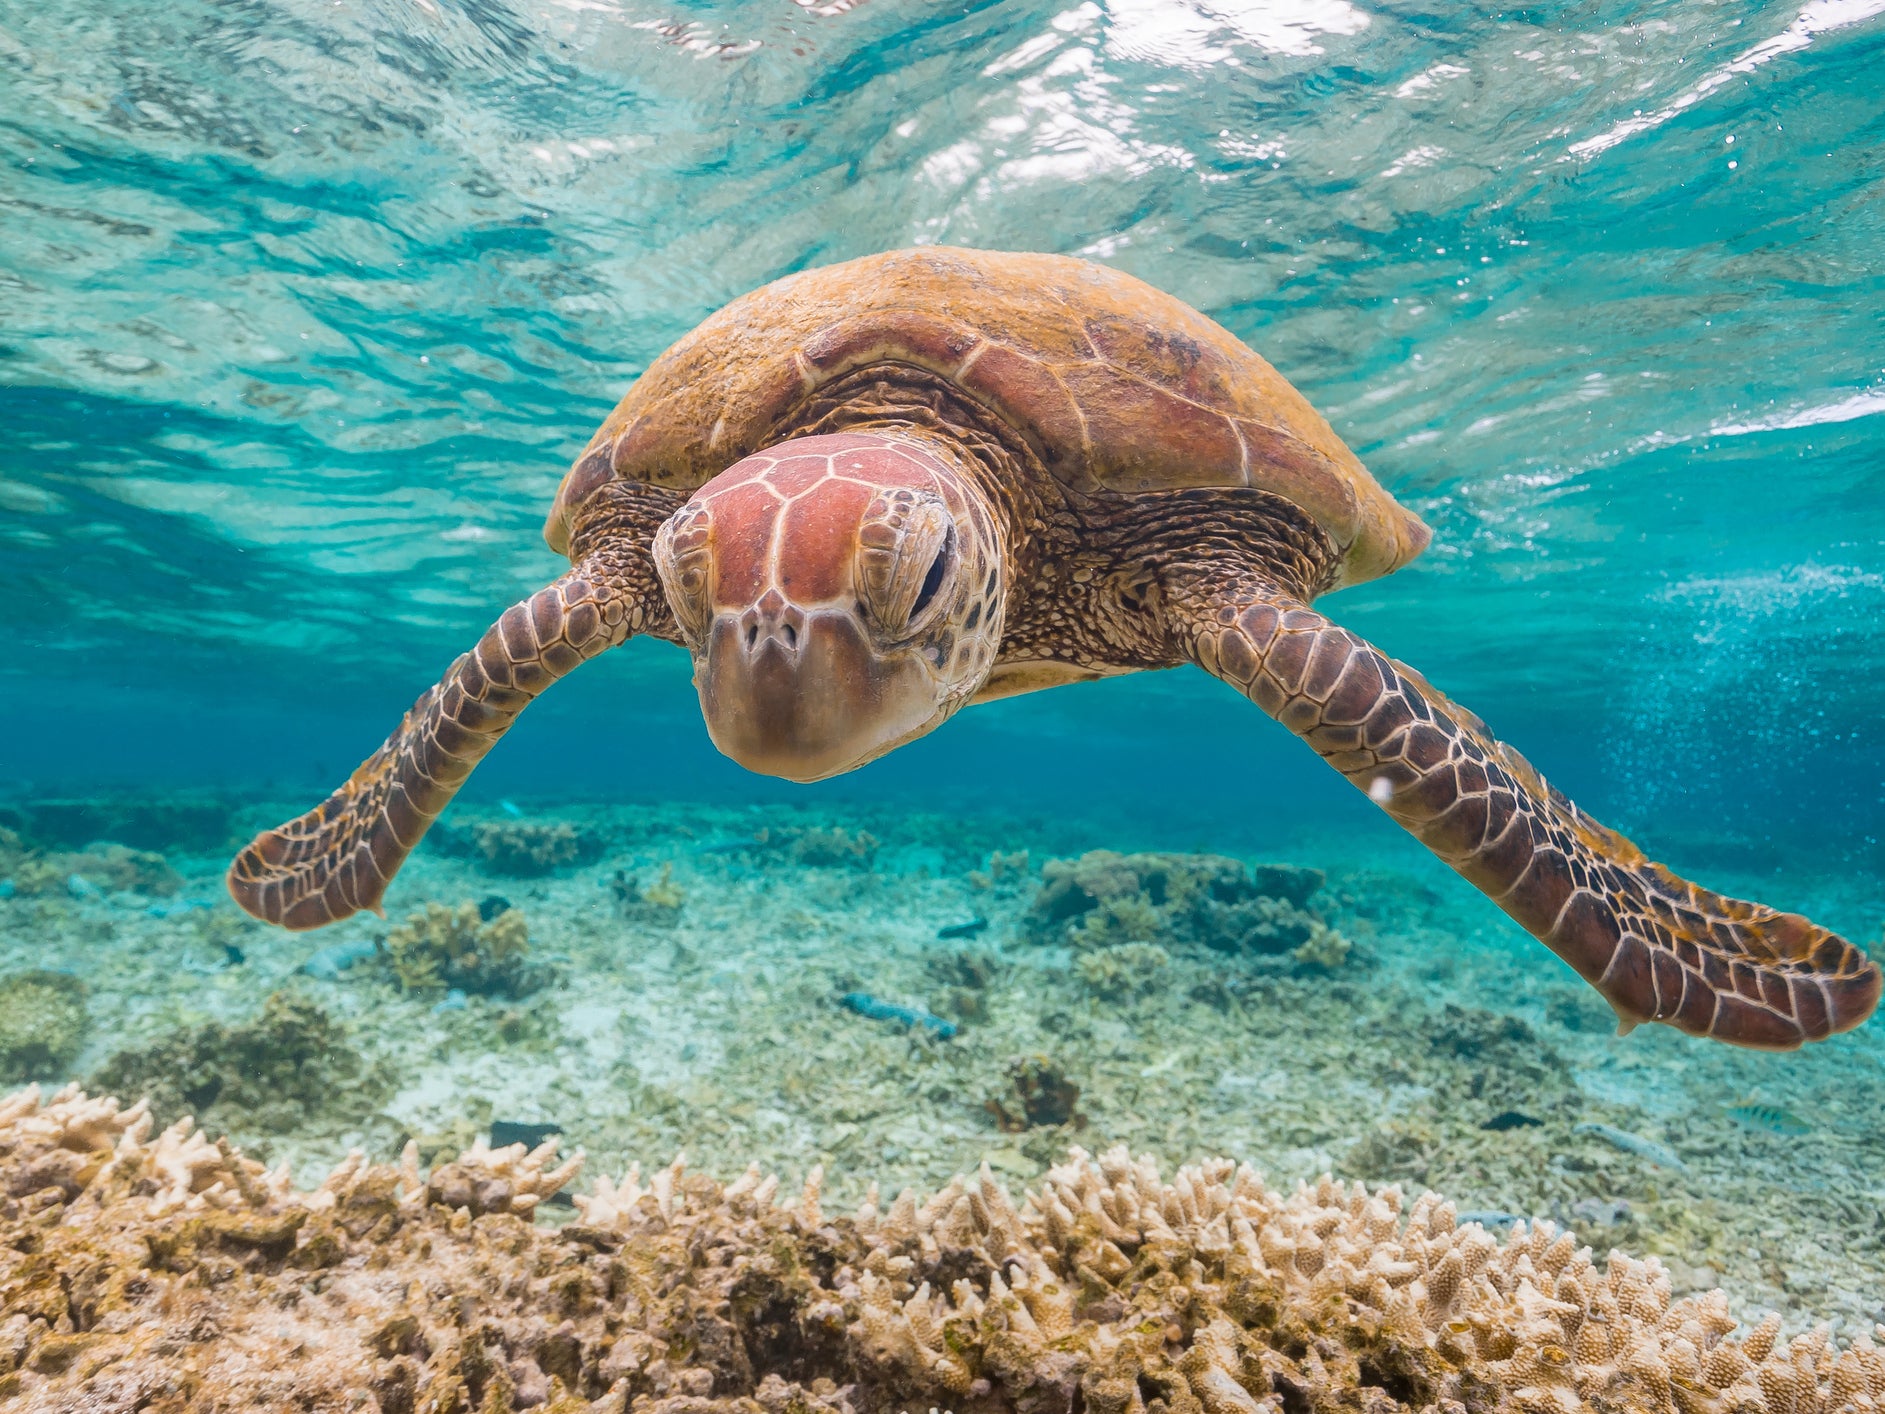 Much was killed or damaged by coral bleaching in 2016 and 2017, with green turtles among the species suffering from significant habitat loss